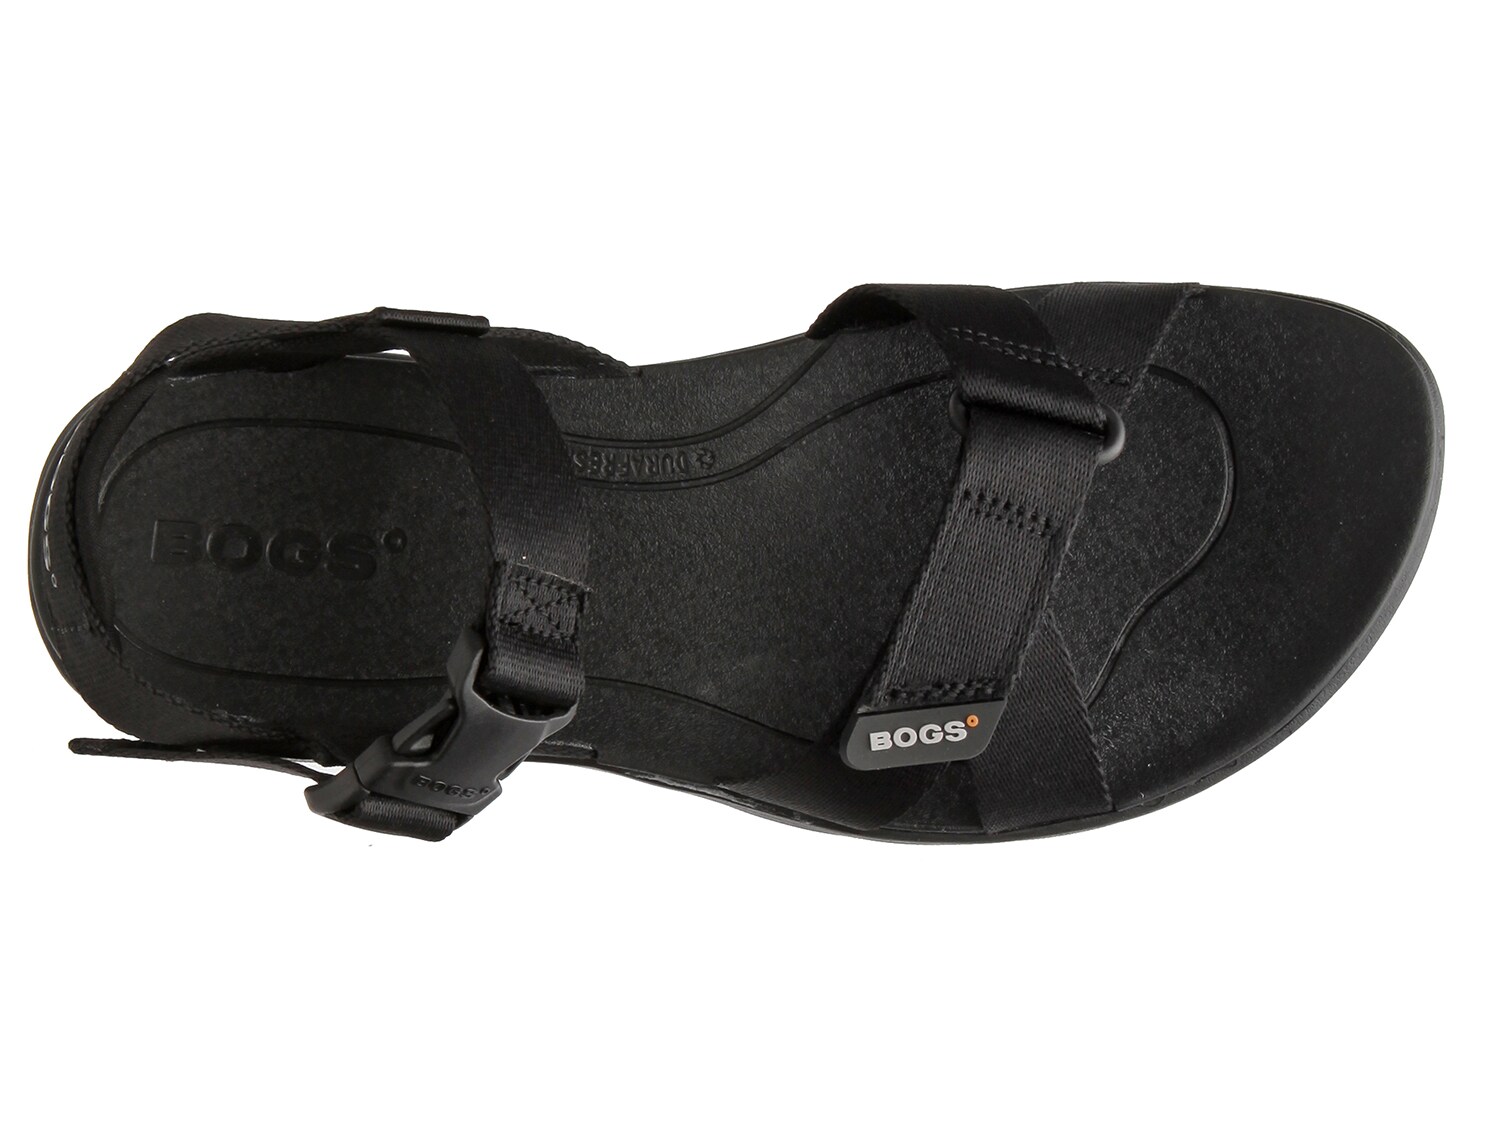 Rio Shop And Buy Online At Bogsfootwear Com Official Site Bogs Boots Sandals Bogs